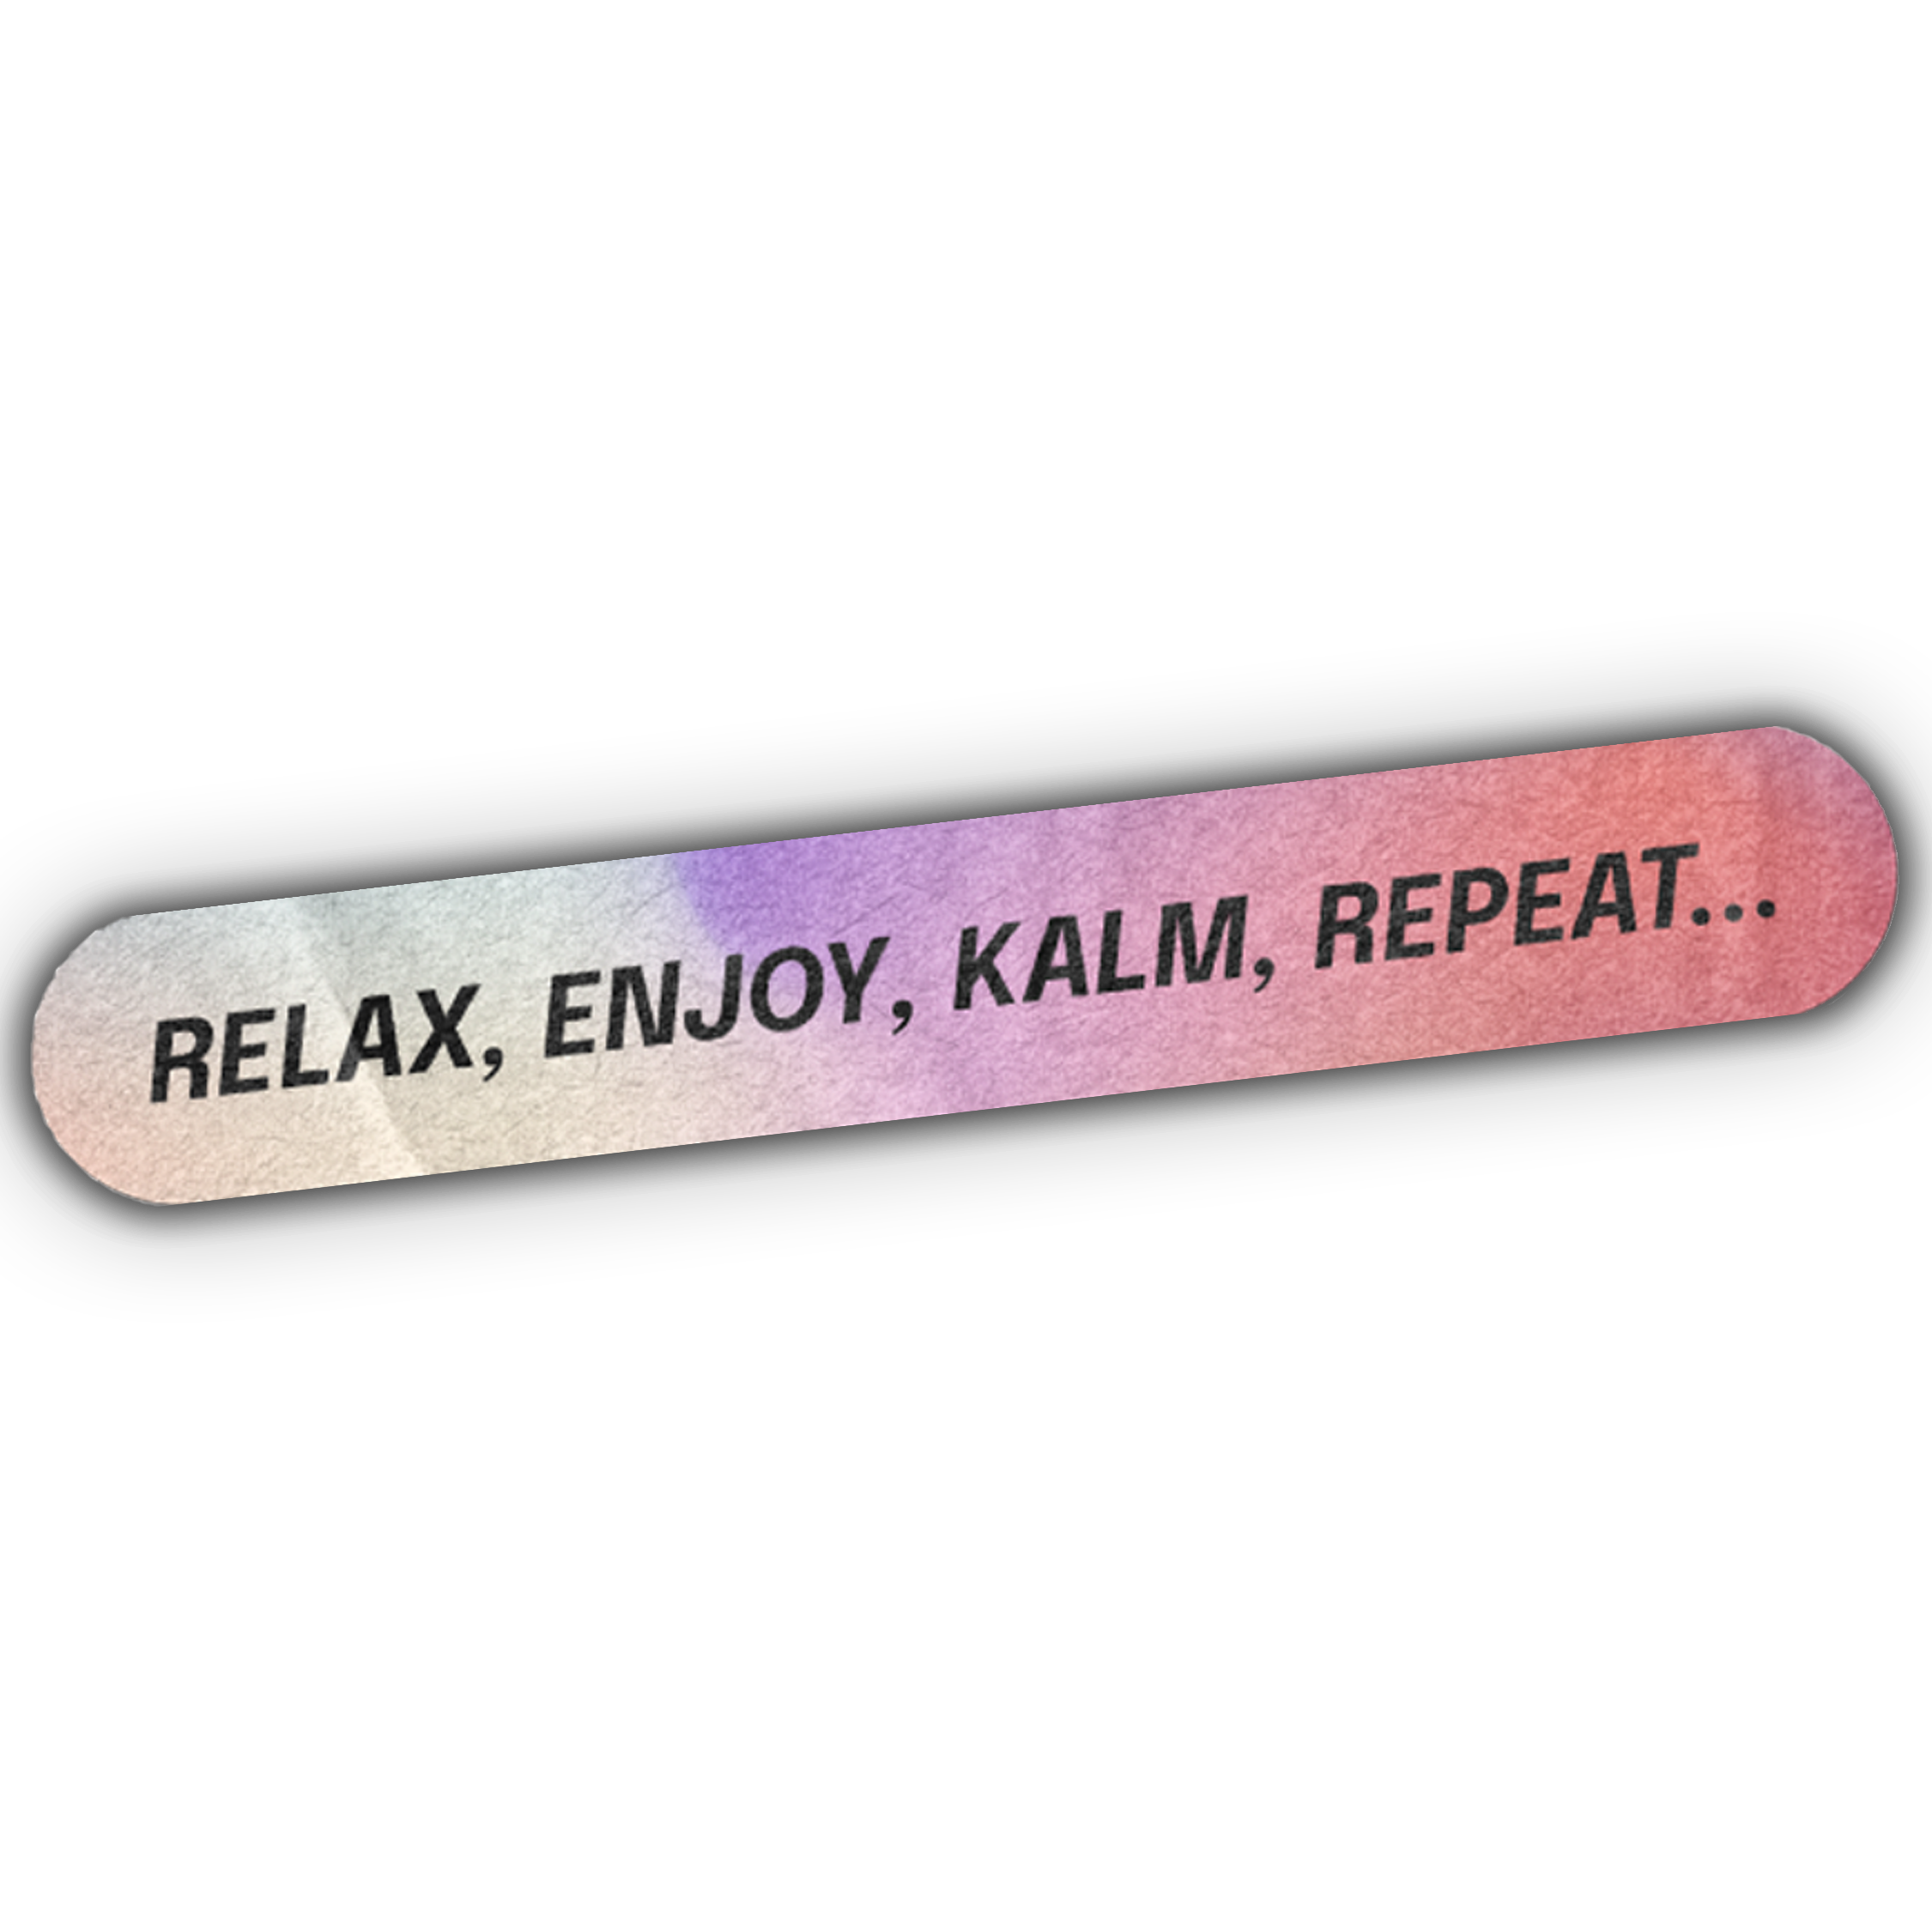 Kalm ''RELAX, ENJOY, KALM, REPEAT'' Sticker. Personalize Anything with Our Stickers, Durable and Water-Resistant